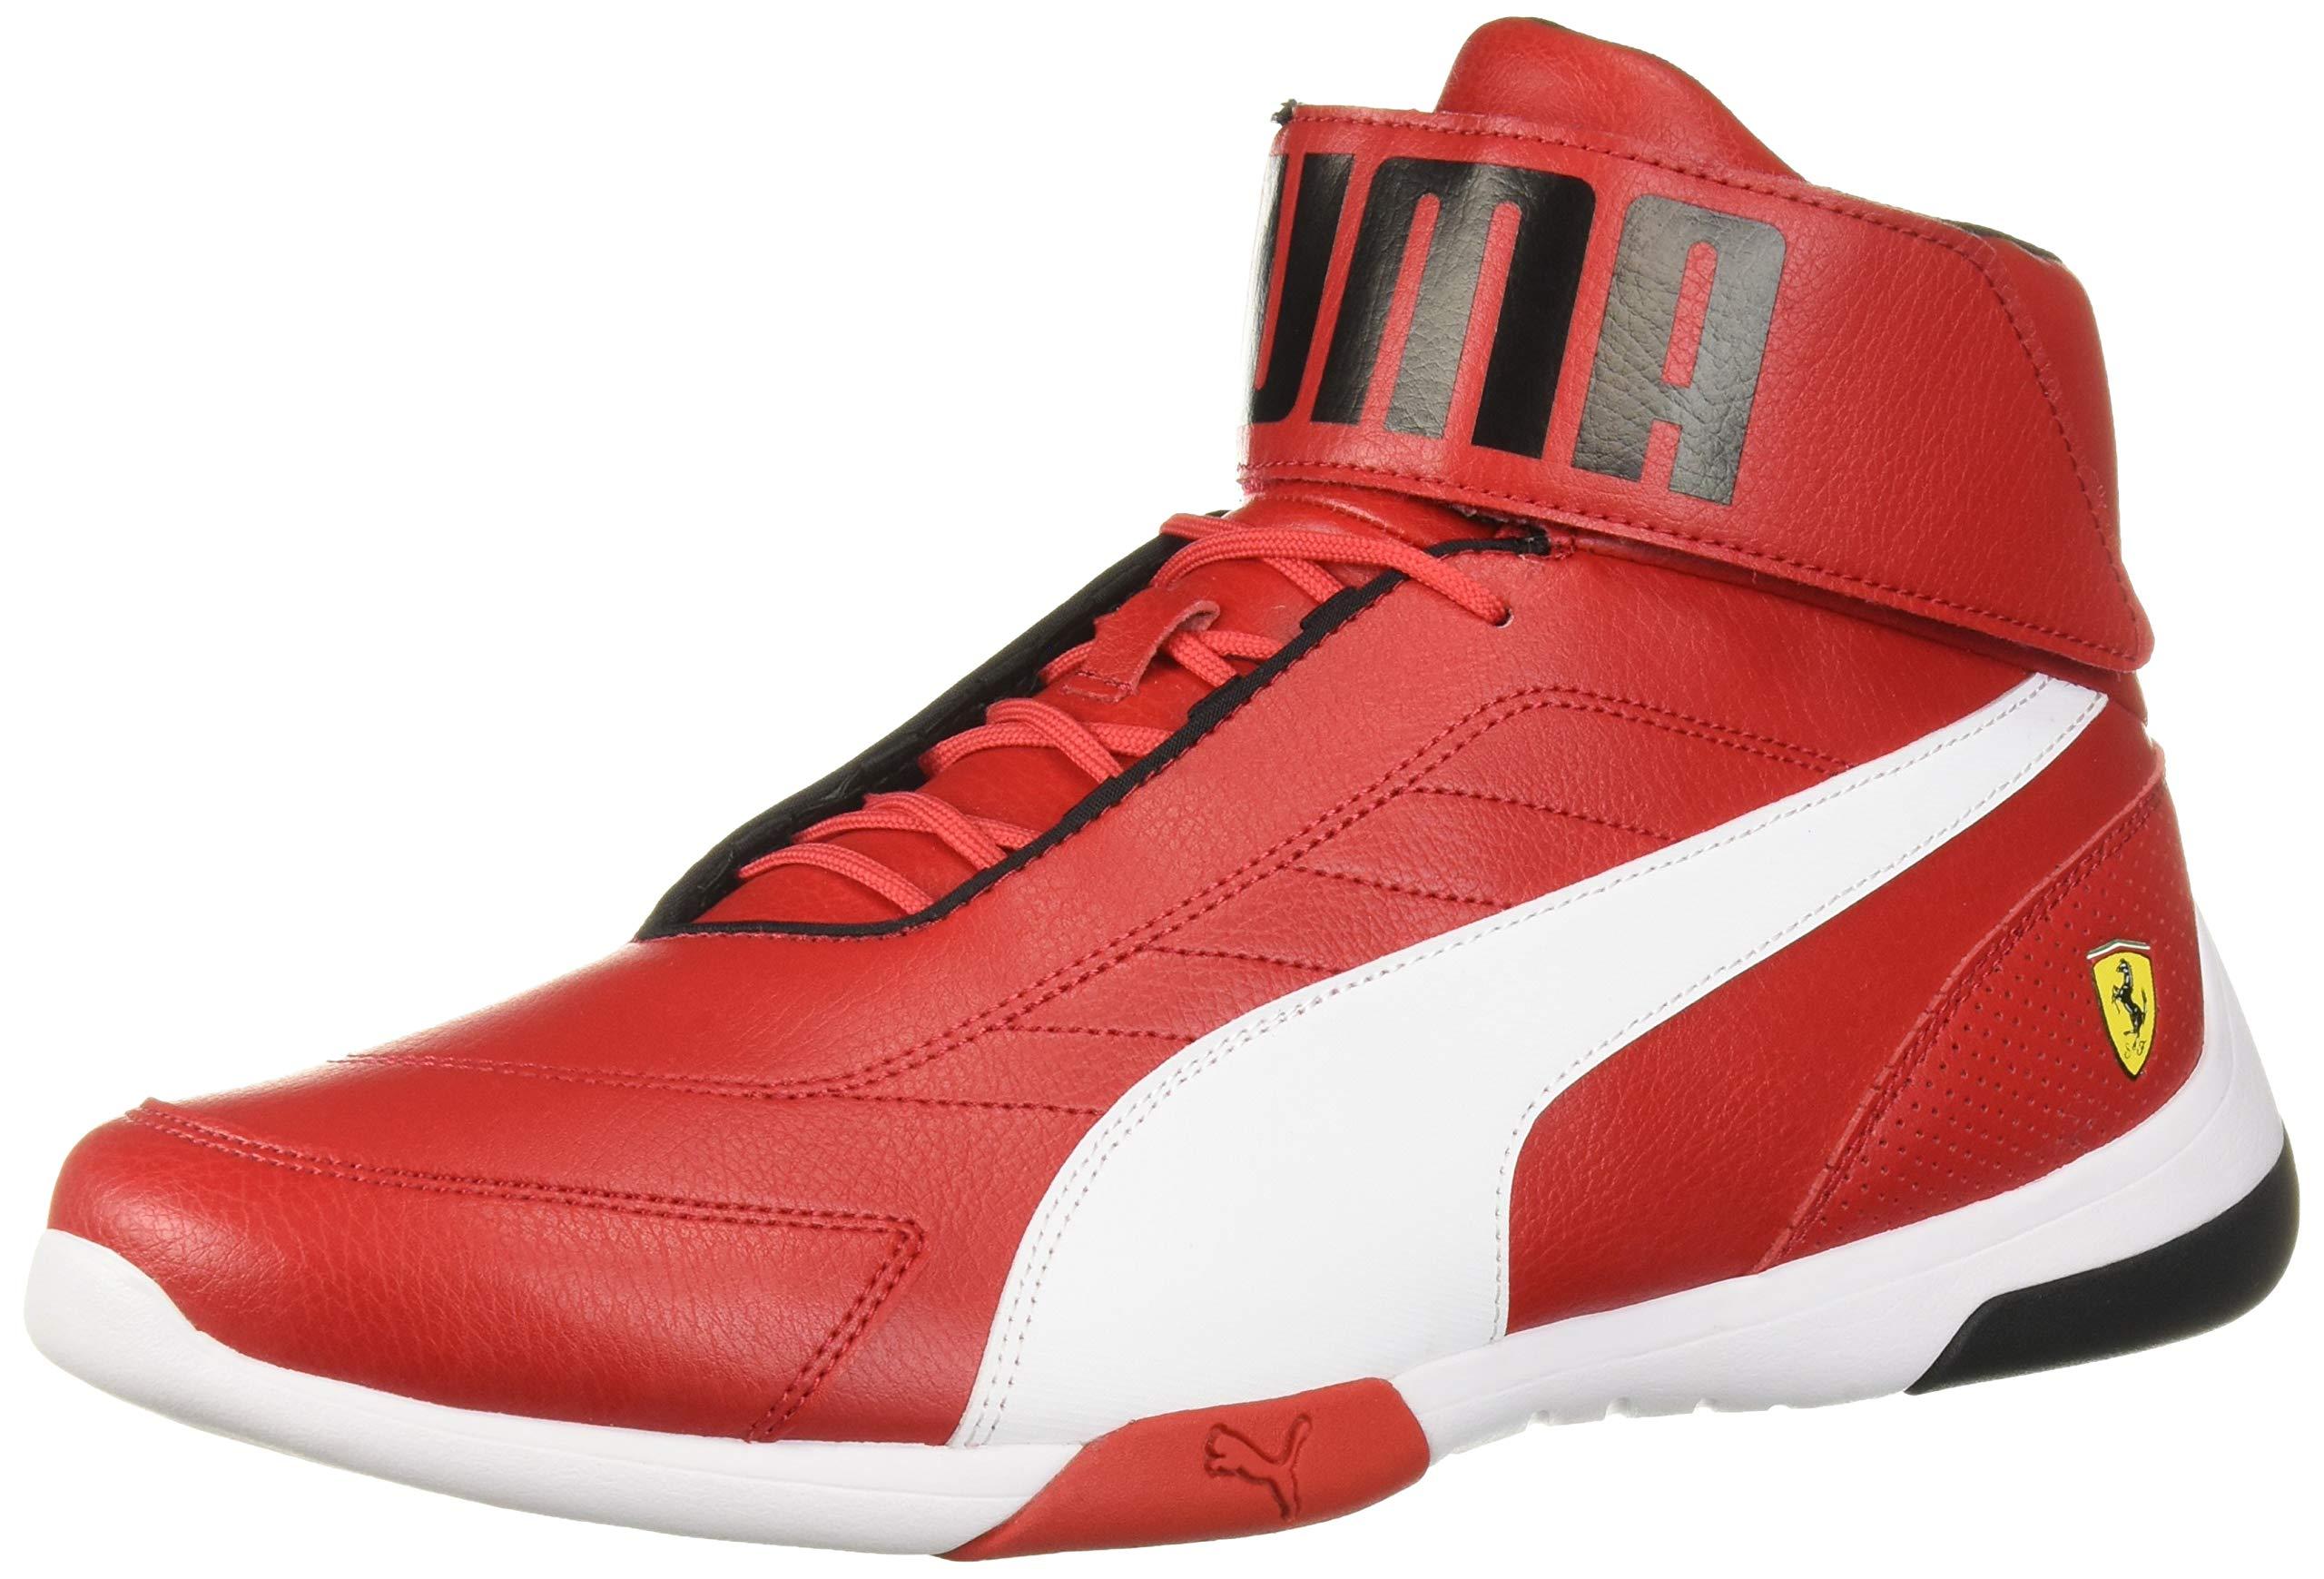 PUMA S Sf Kart Cat Mid Iii Shoes in Red 